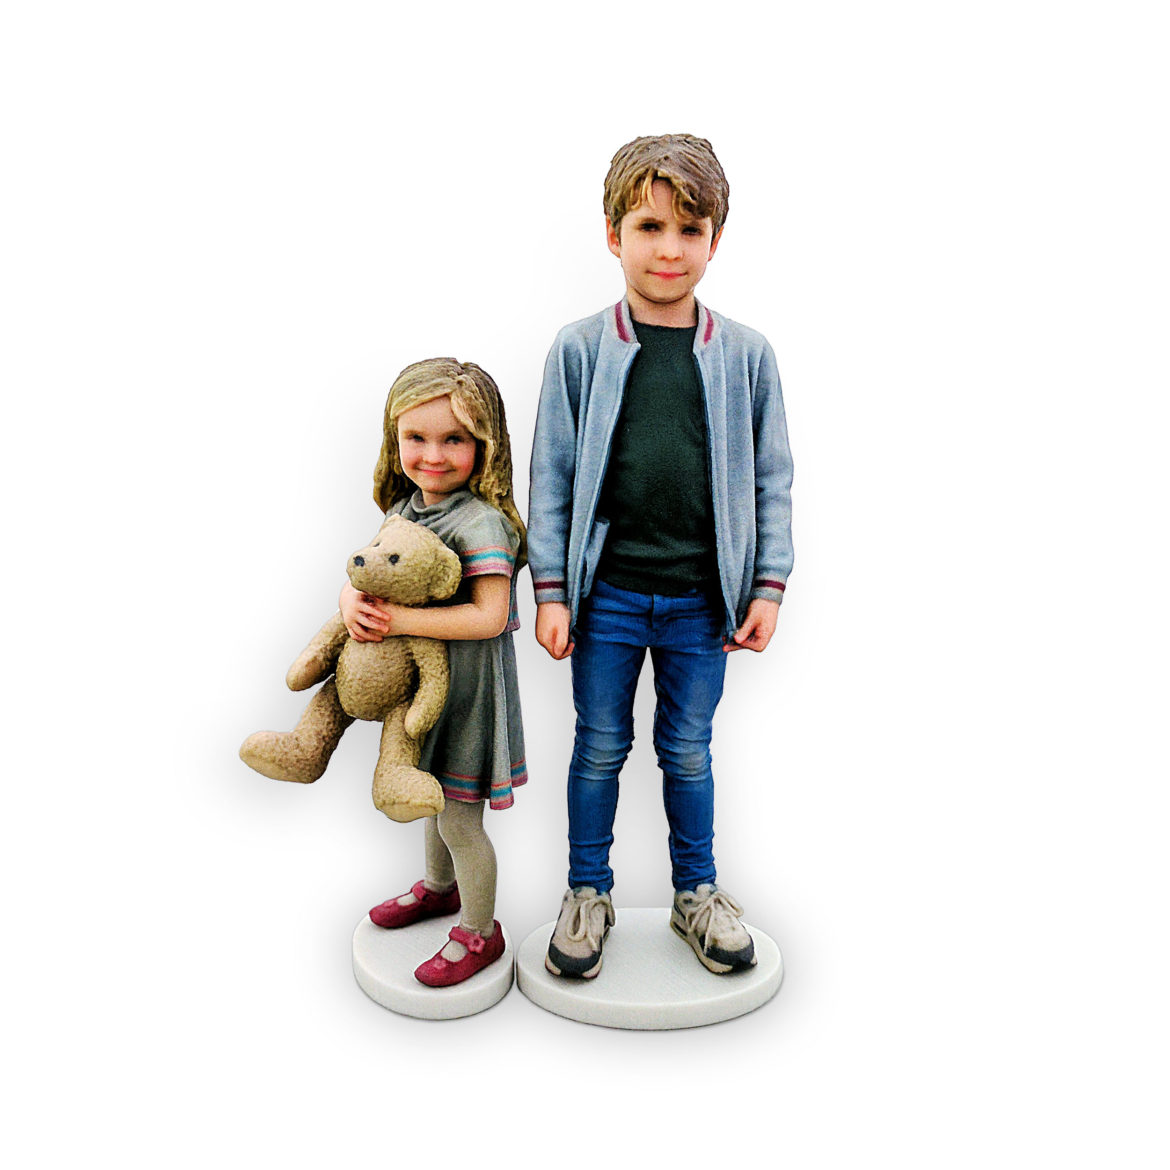 my3Dtwin, 3D Printed Figurines of two kids with teddy bear in hands